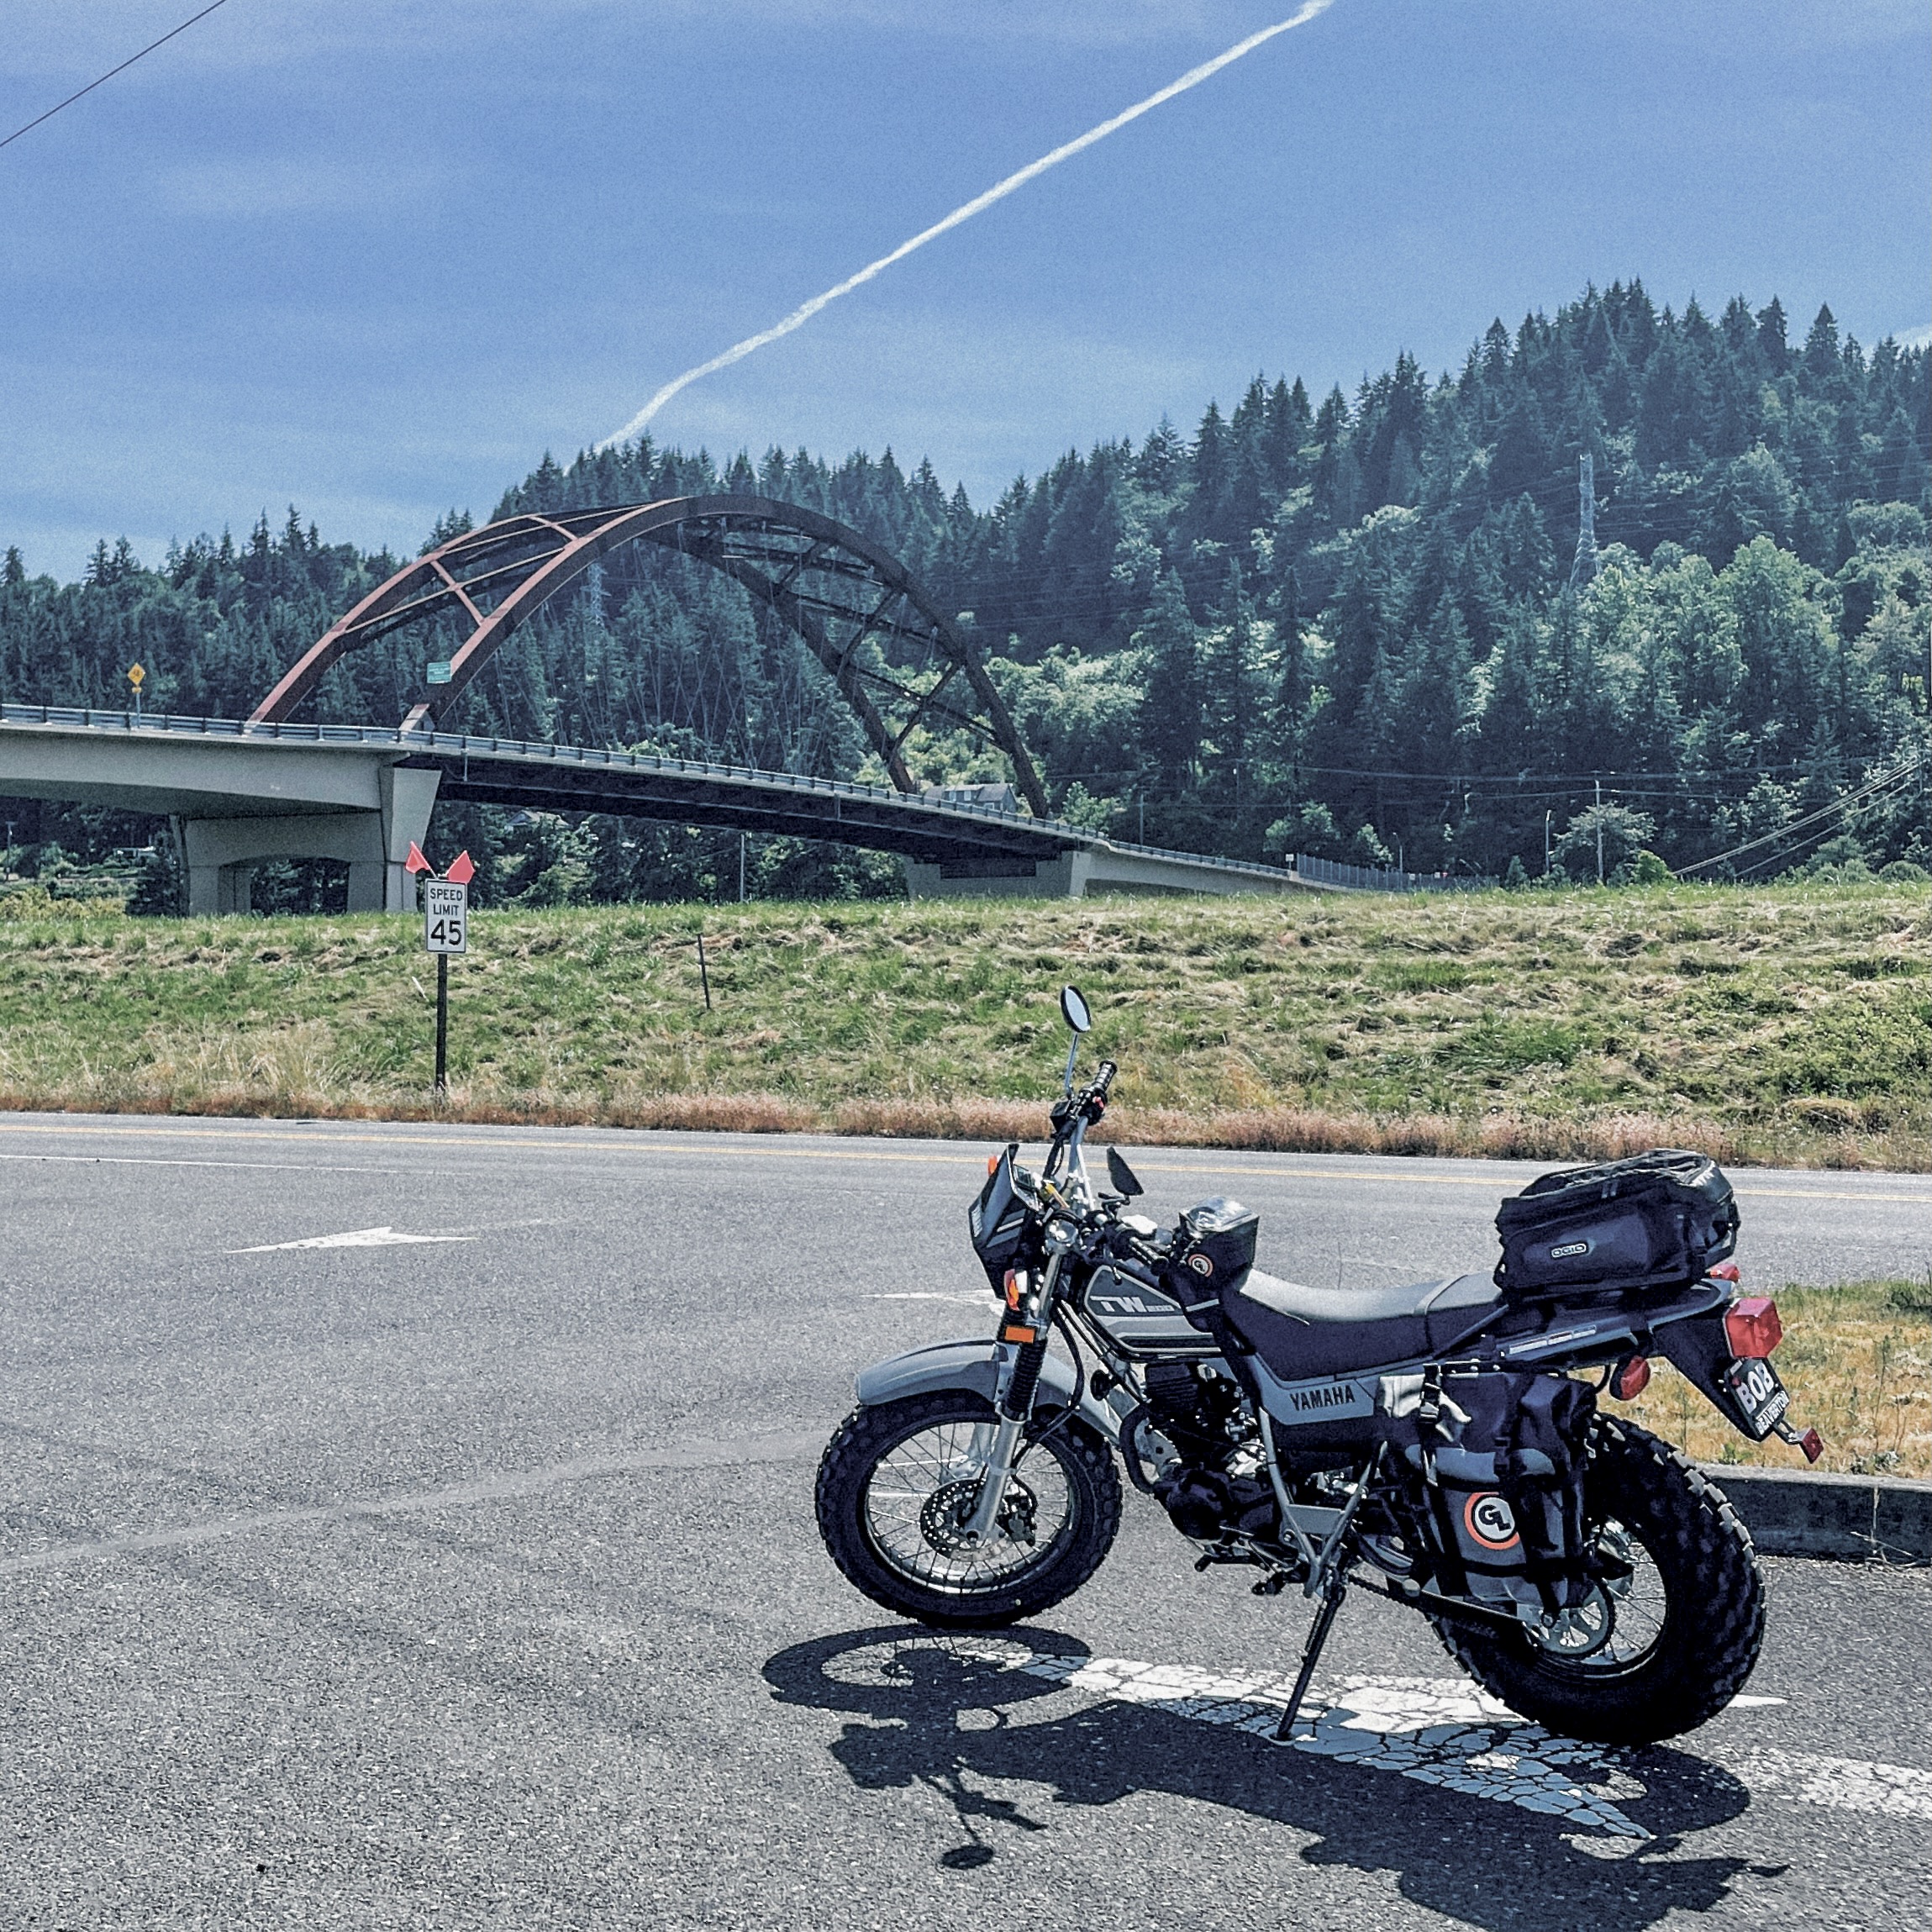 A Yamaha TW200 parked in front of a suspension bridge on a sunny day.